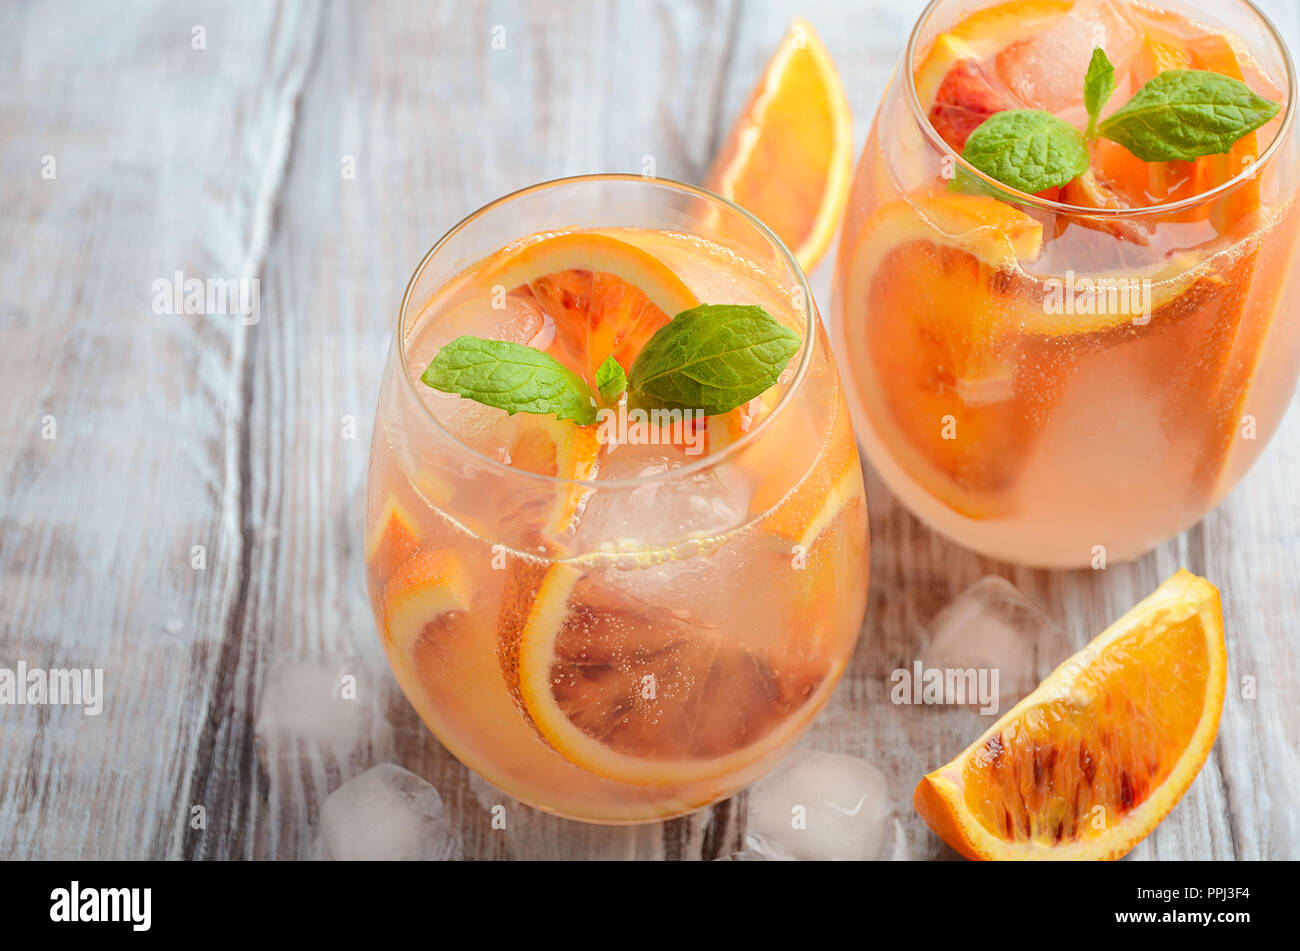 Cold refreshing drink with blood orange slices in a glass on a wooden background. Stock Photo